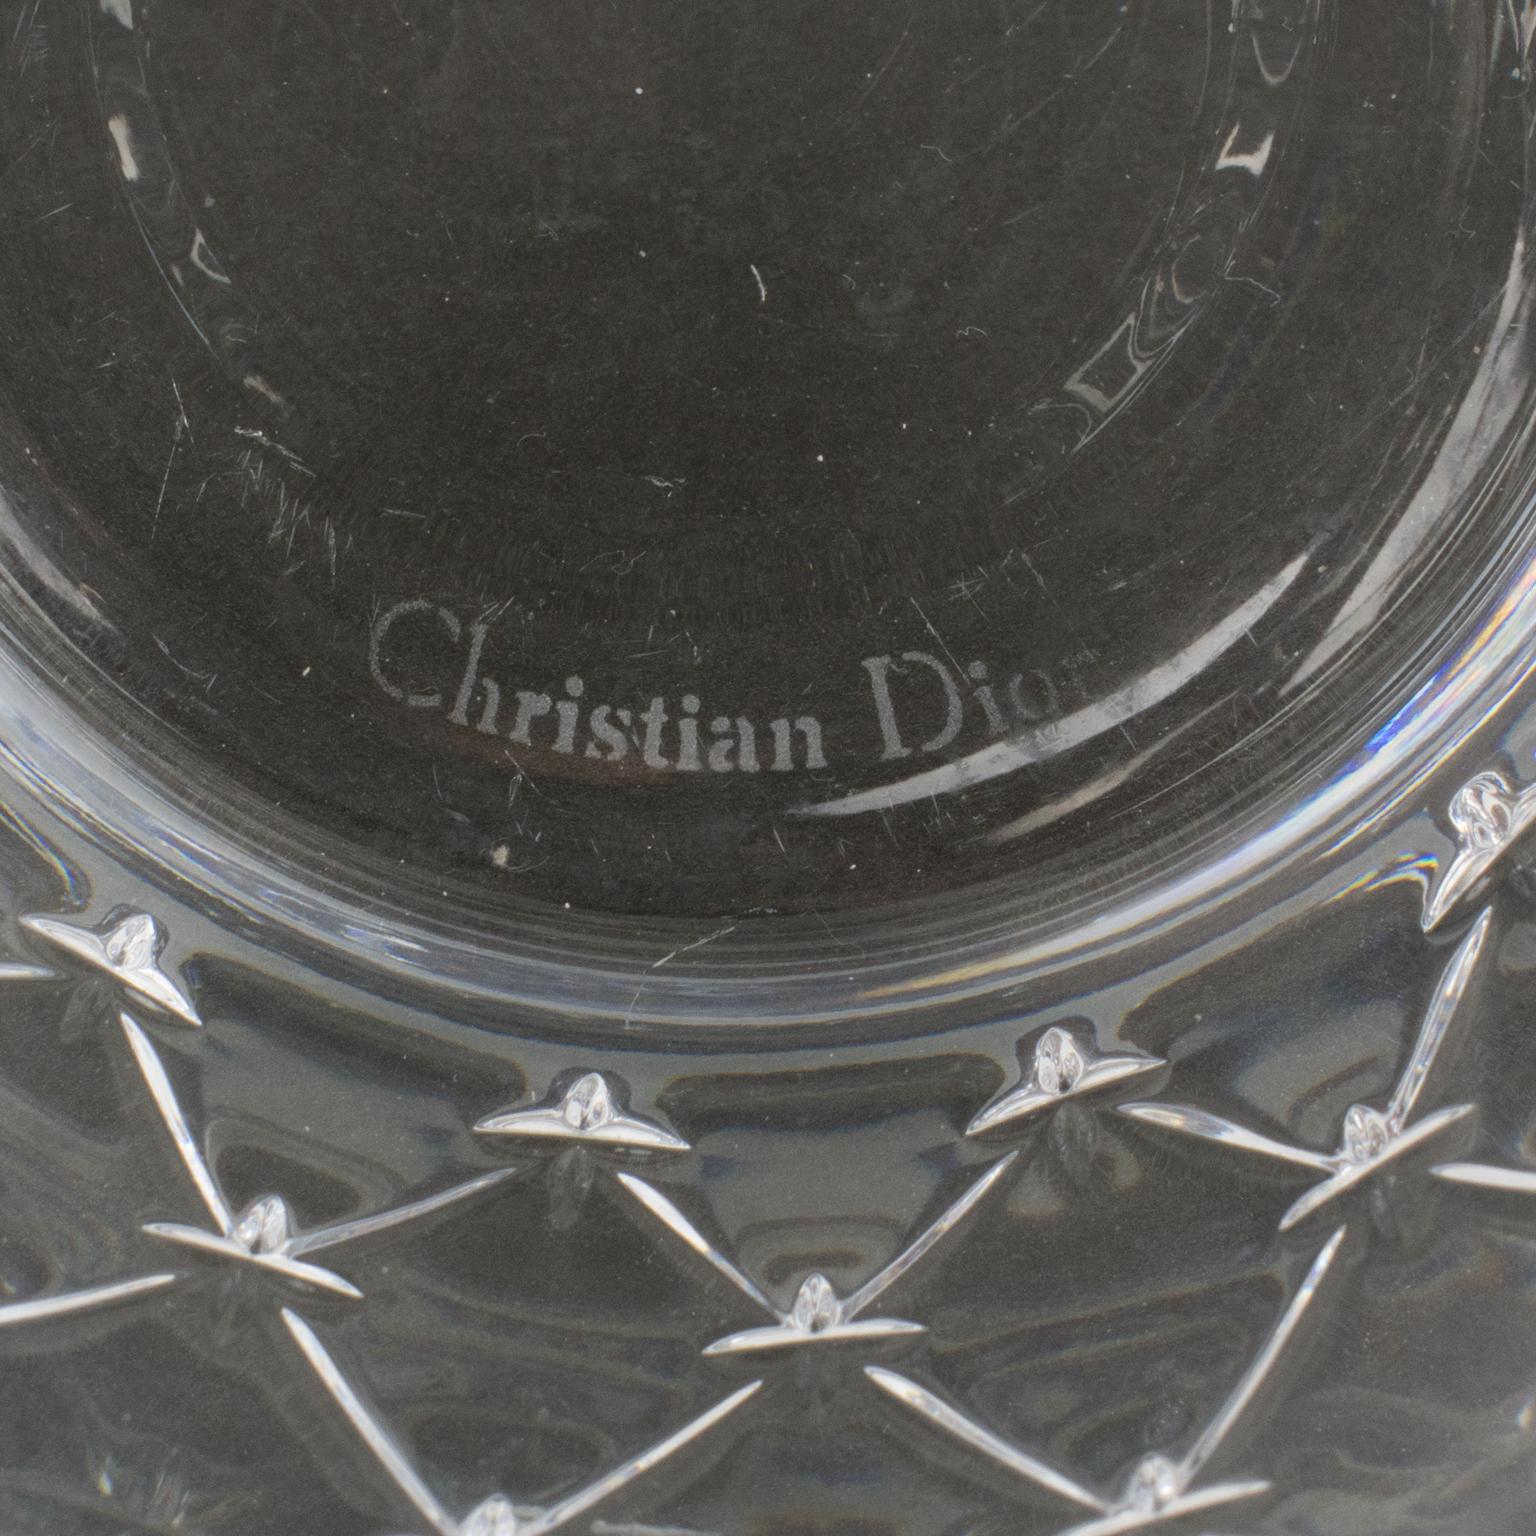 Christian Dior Etched Crystal and Stainless Steel Ice Bucket Cooler 1